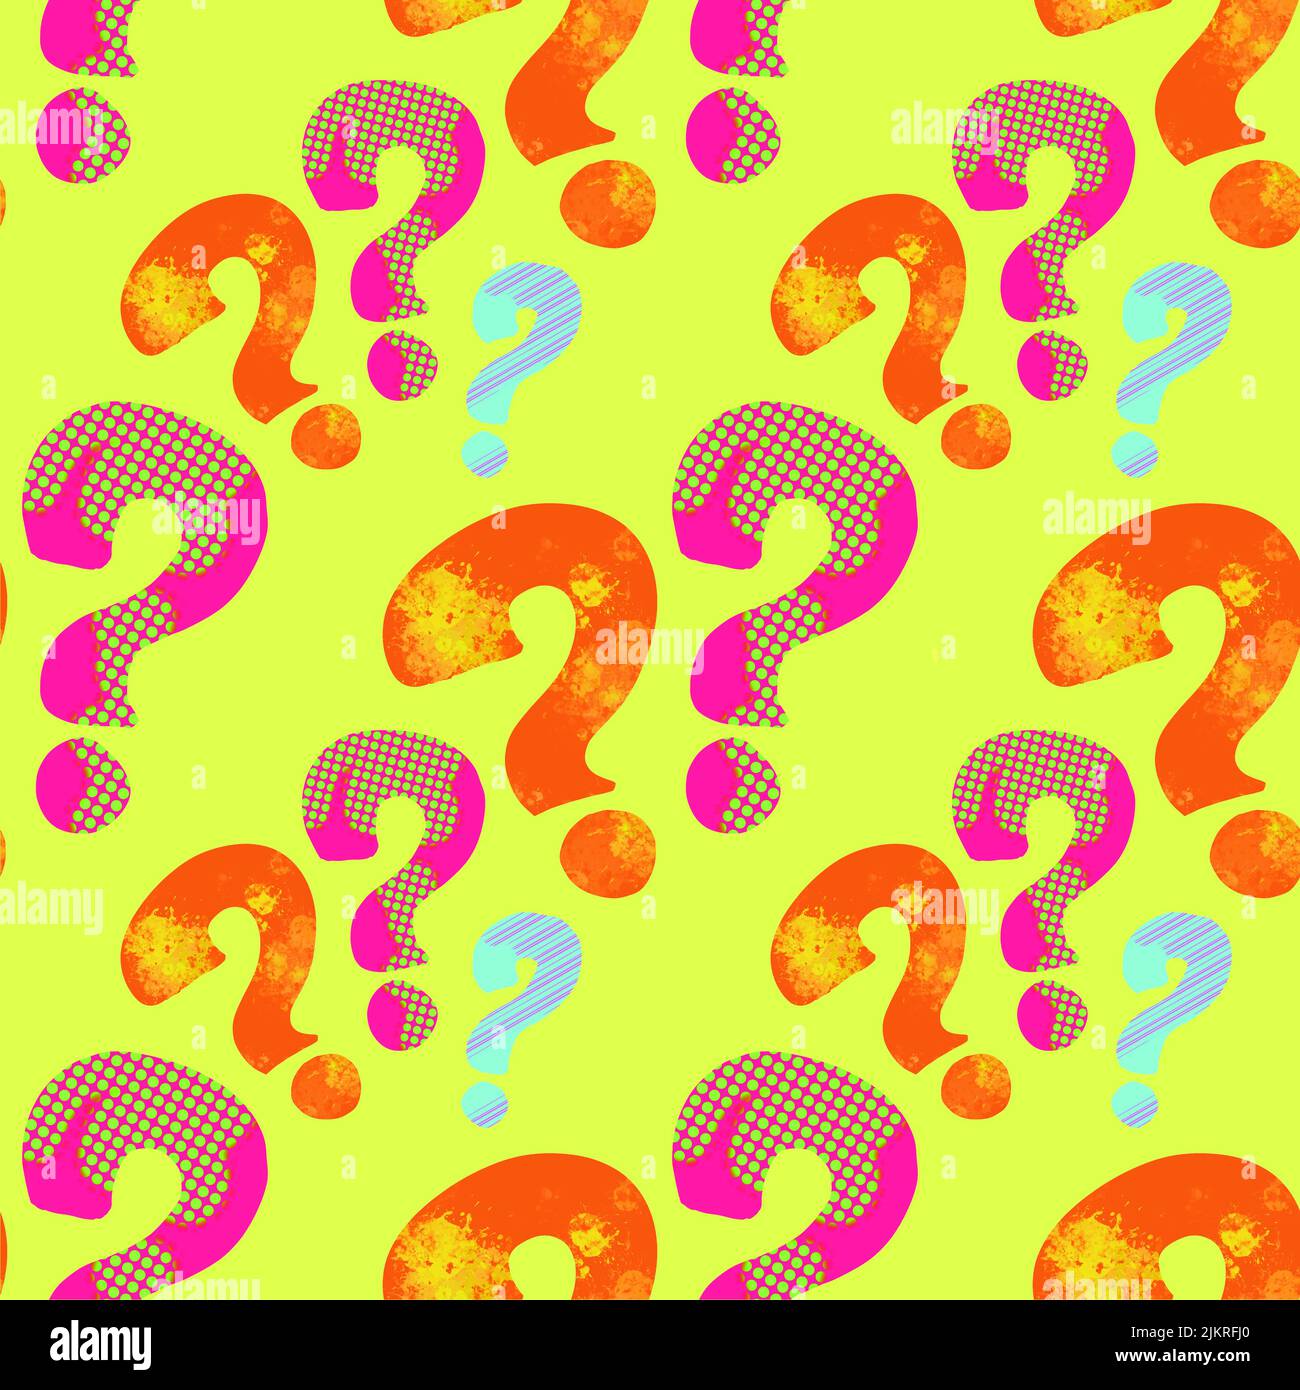 Question marks seamless pattern, multi-color design of question marks pattern, hand-drawn, modern style pattern. Stock Photo